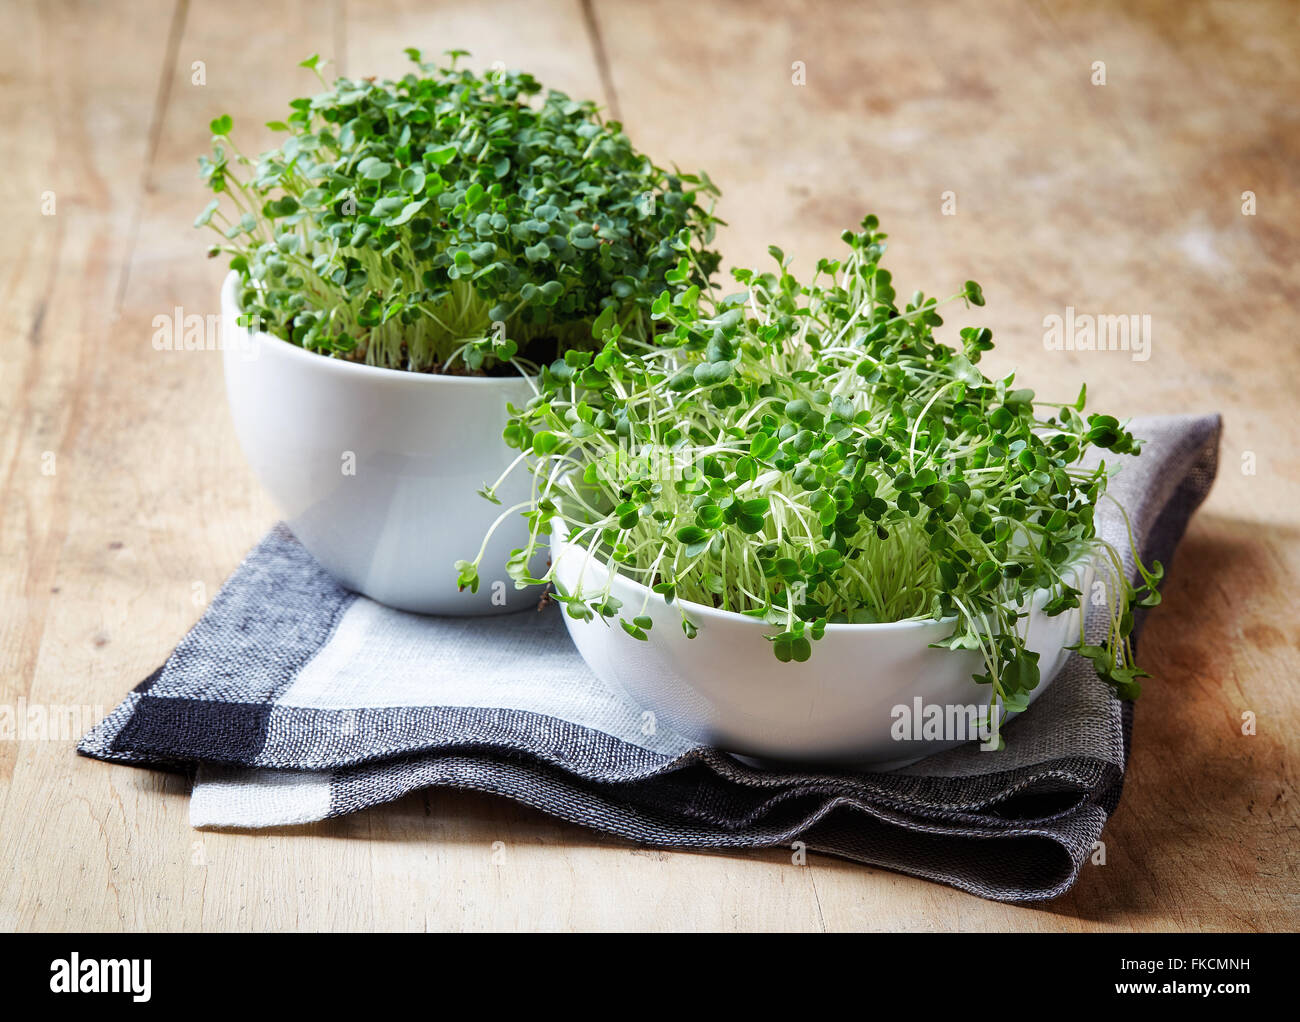 Fresh broccoli and arugula psrout on wooden table Stock Photo